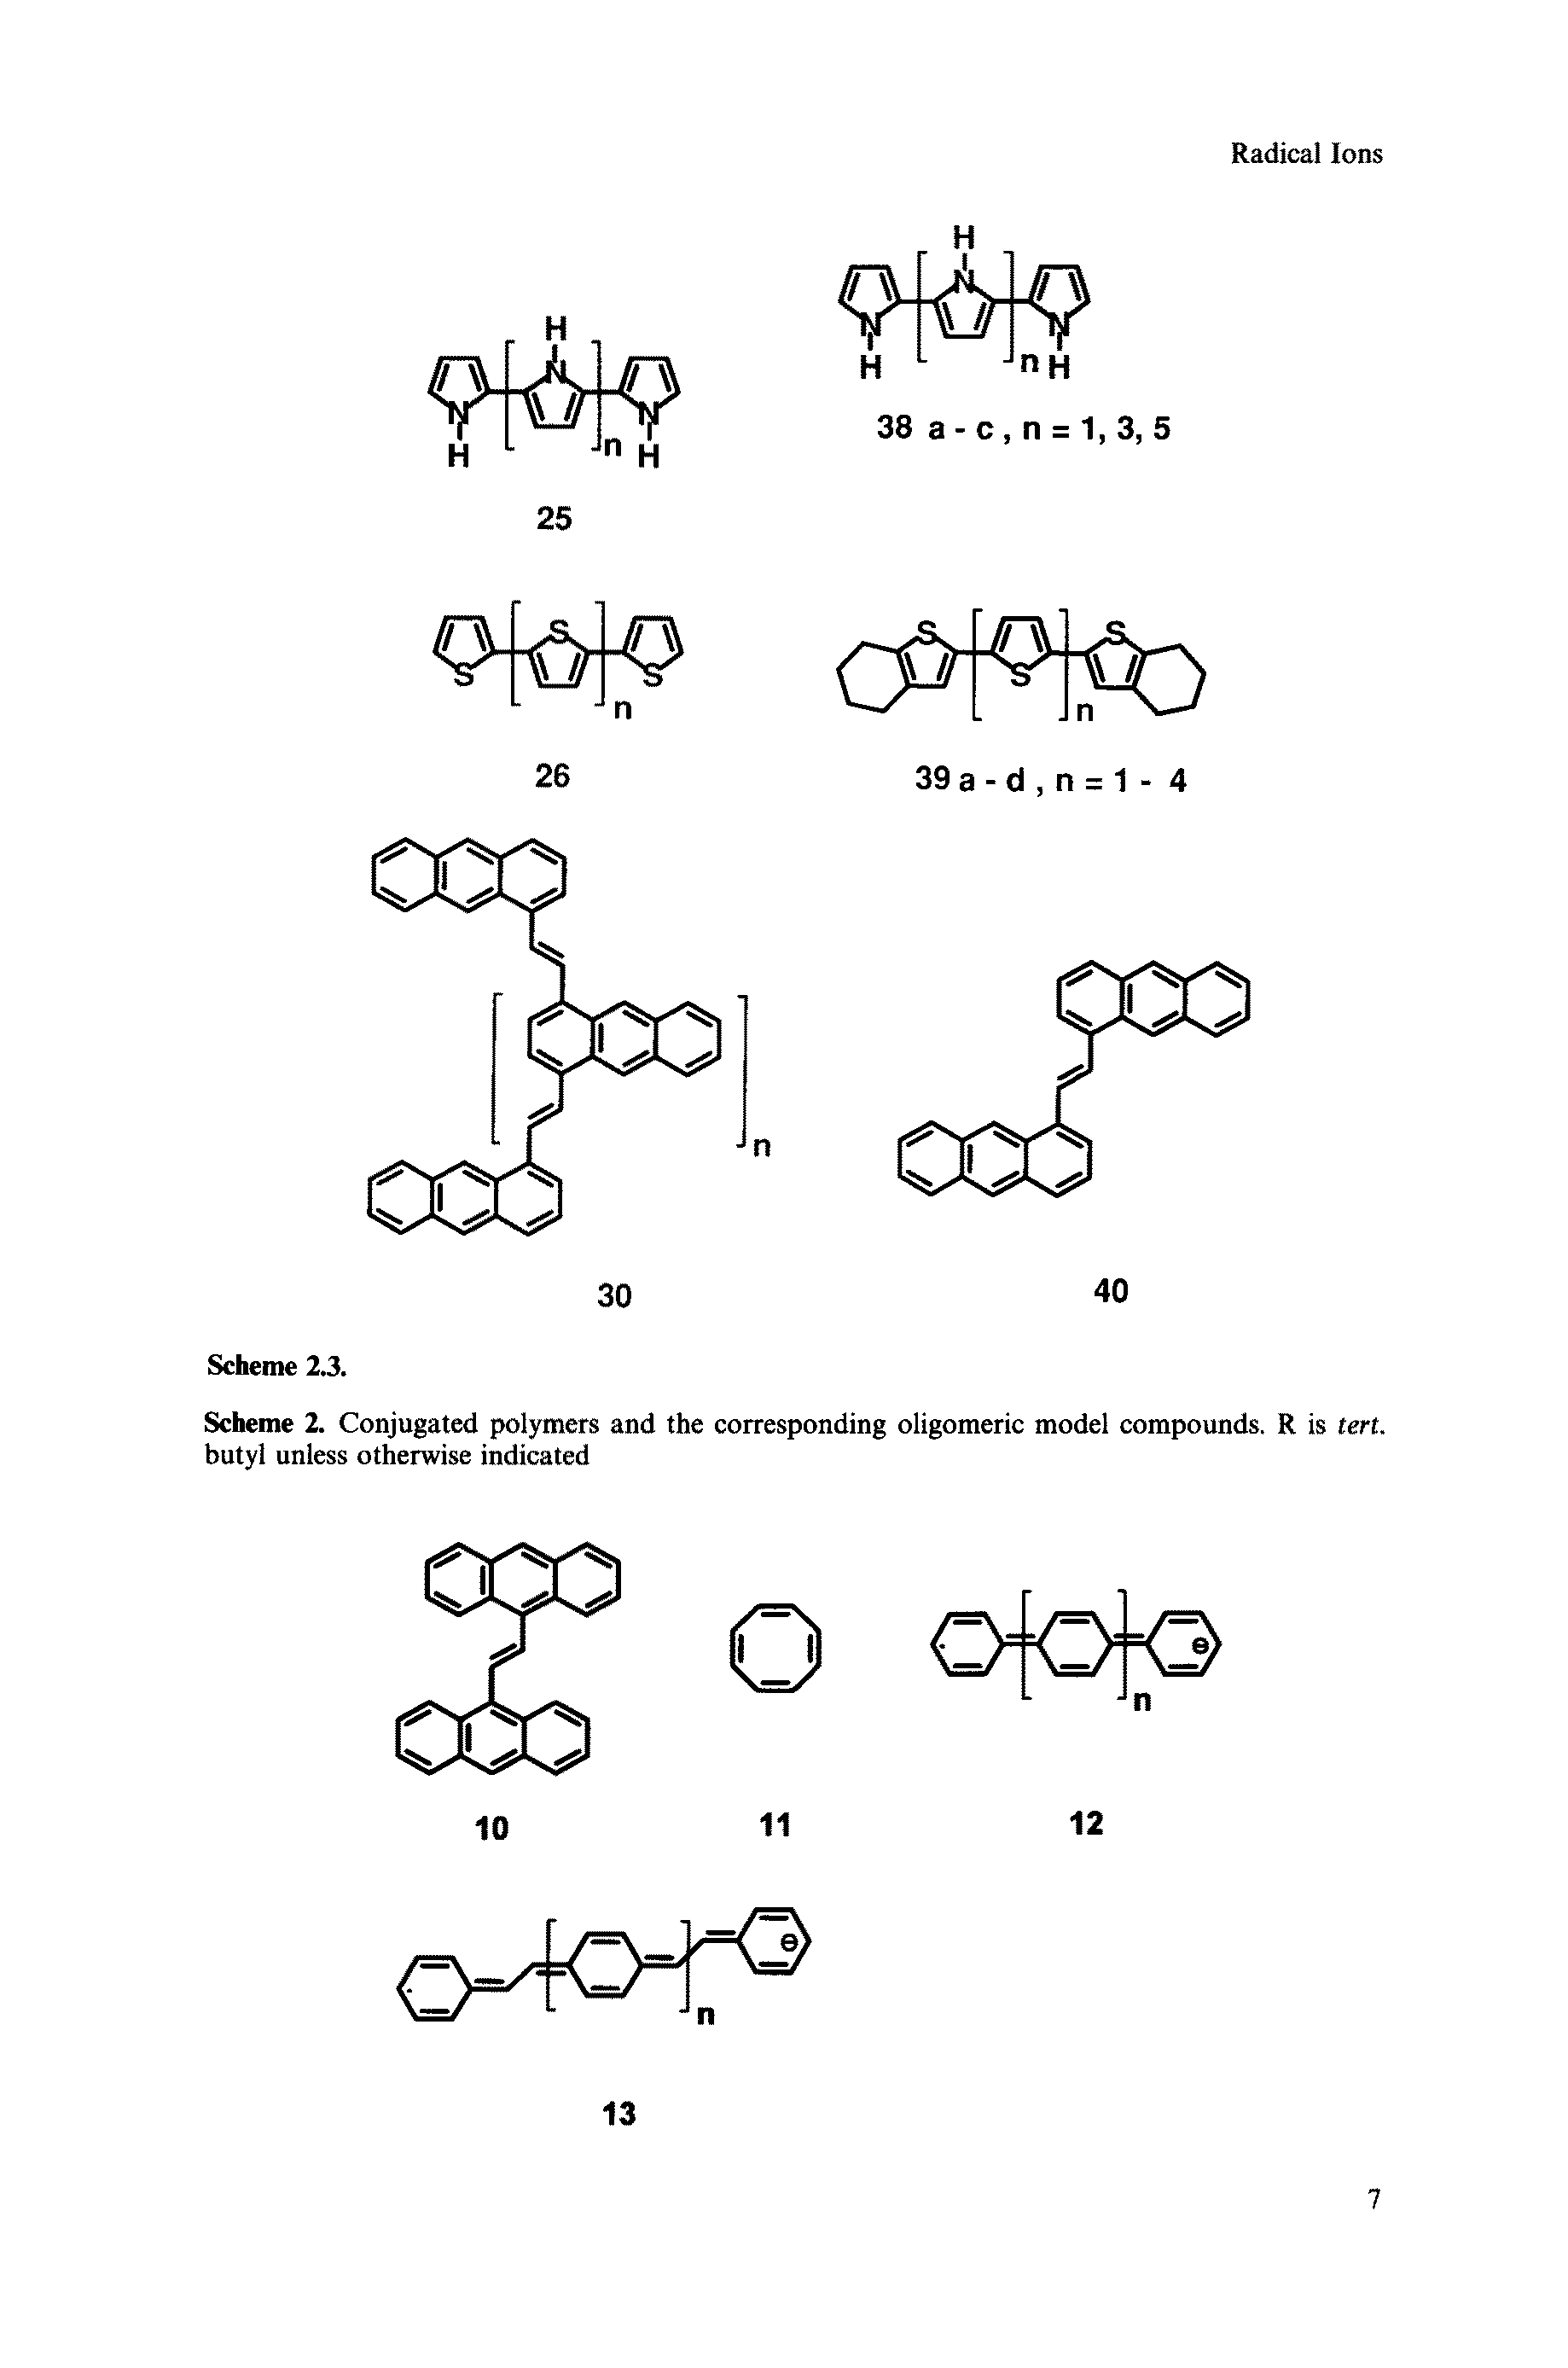 Scheme 2. Conjugated polymers and the corresponding oligomeric model compounds. R is tert. butyl unless otherwise indicated...